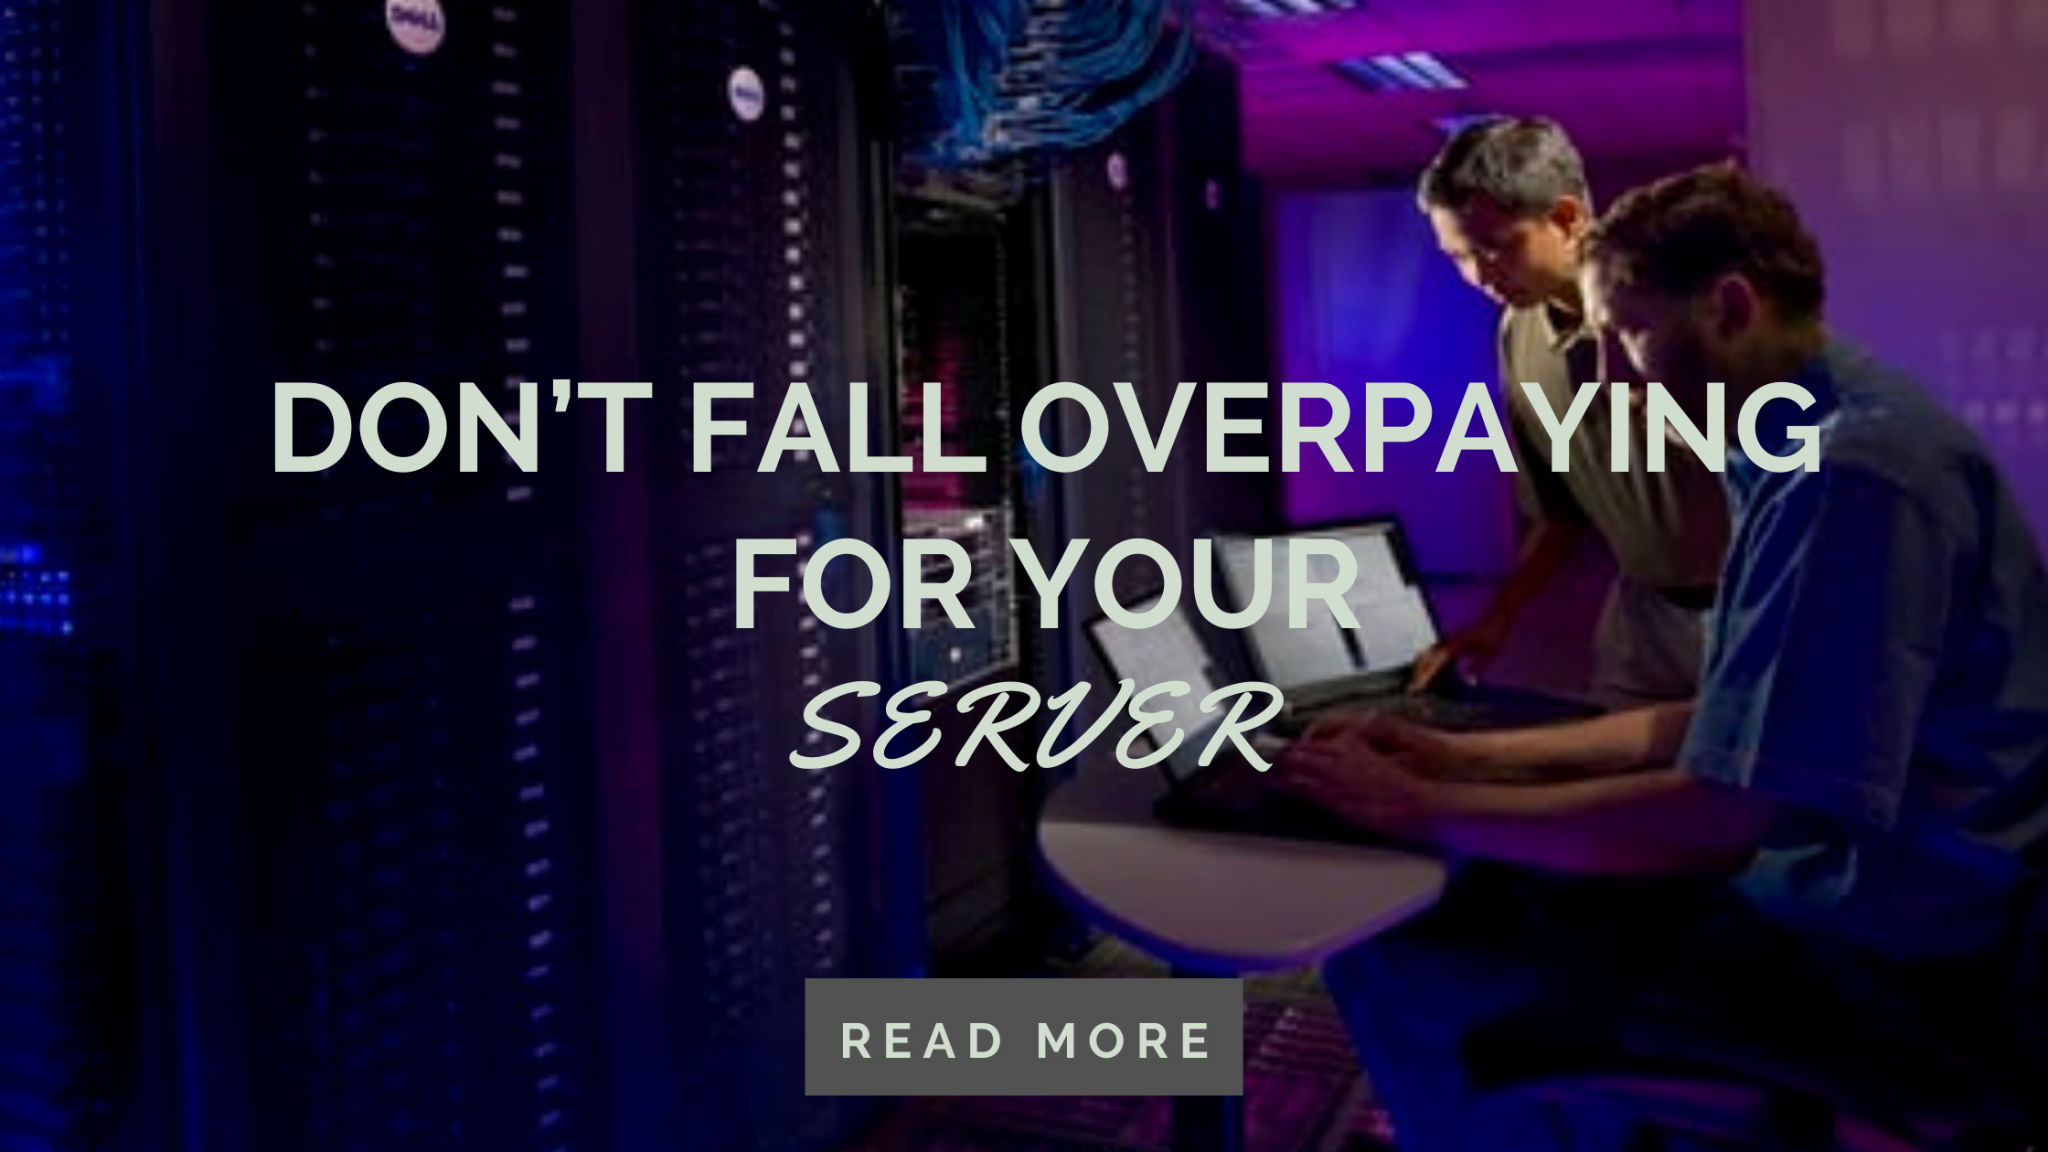 Don’t fall overpaying for your server